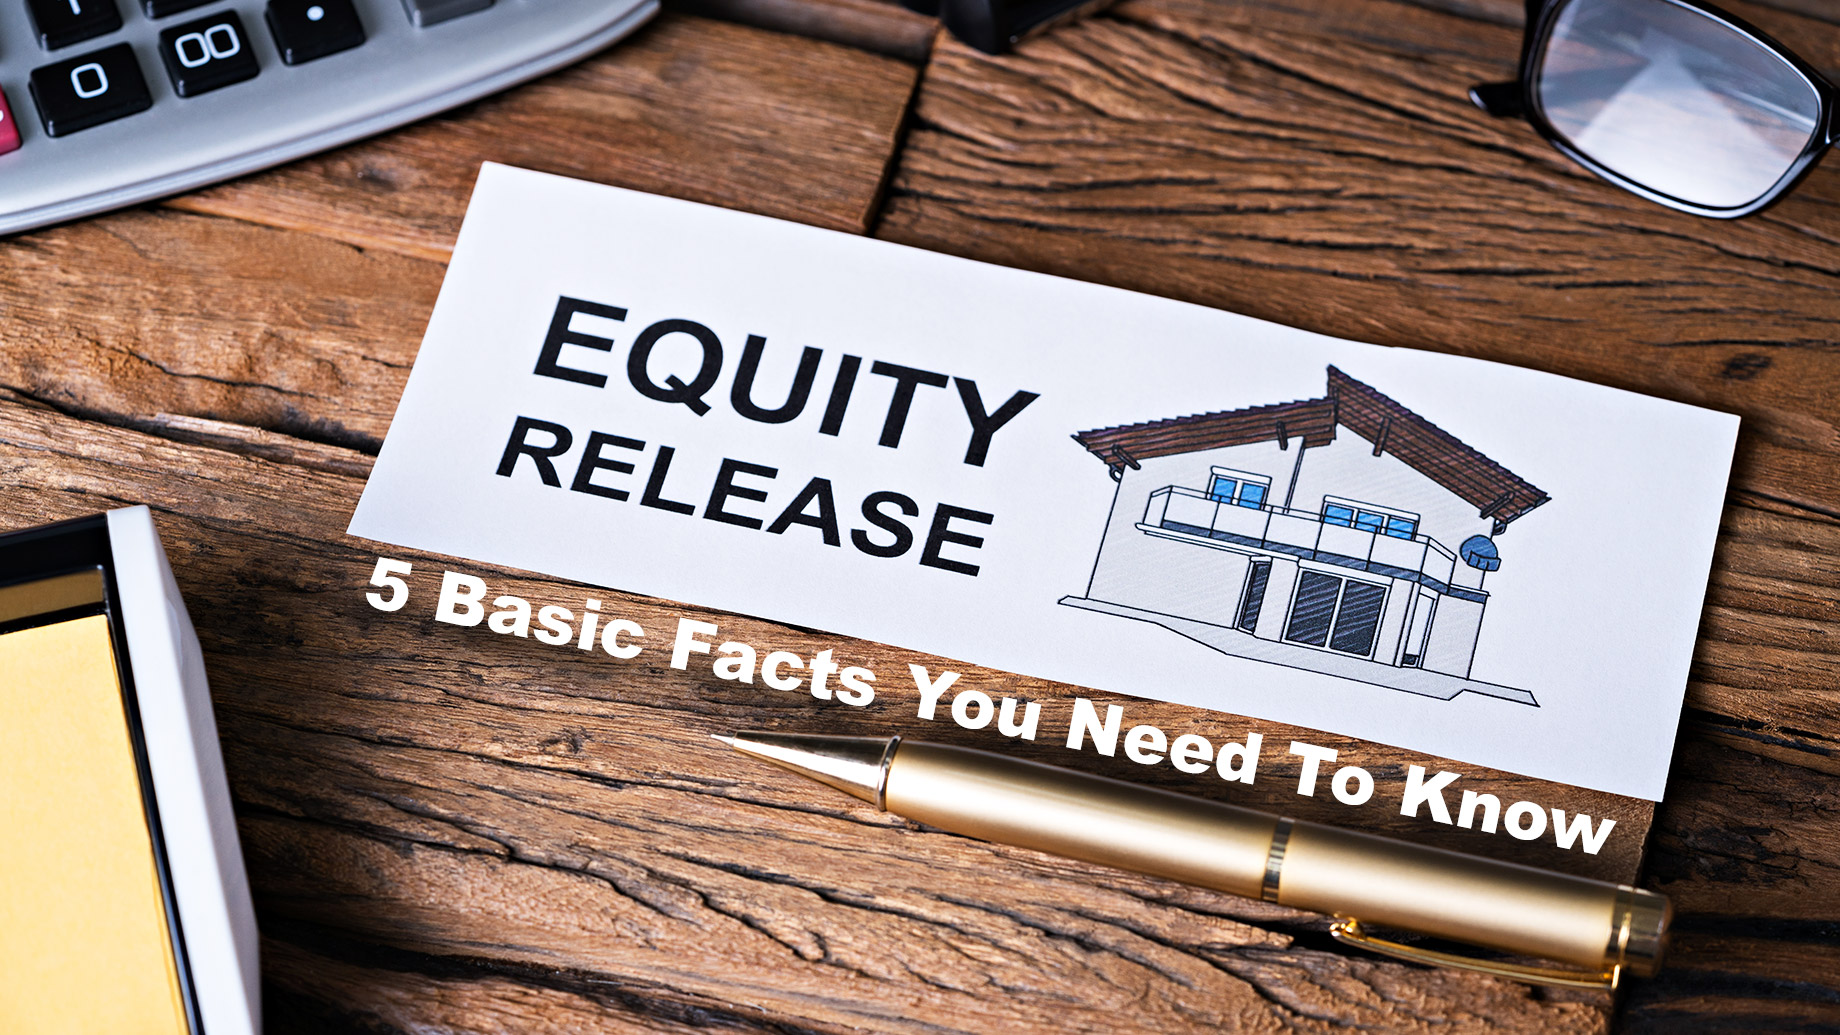 Understanding Equity Release - 5 Basic Facts You Need To Know